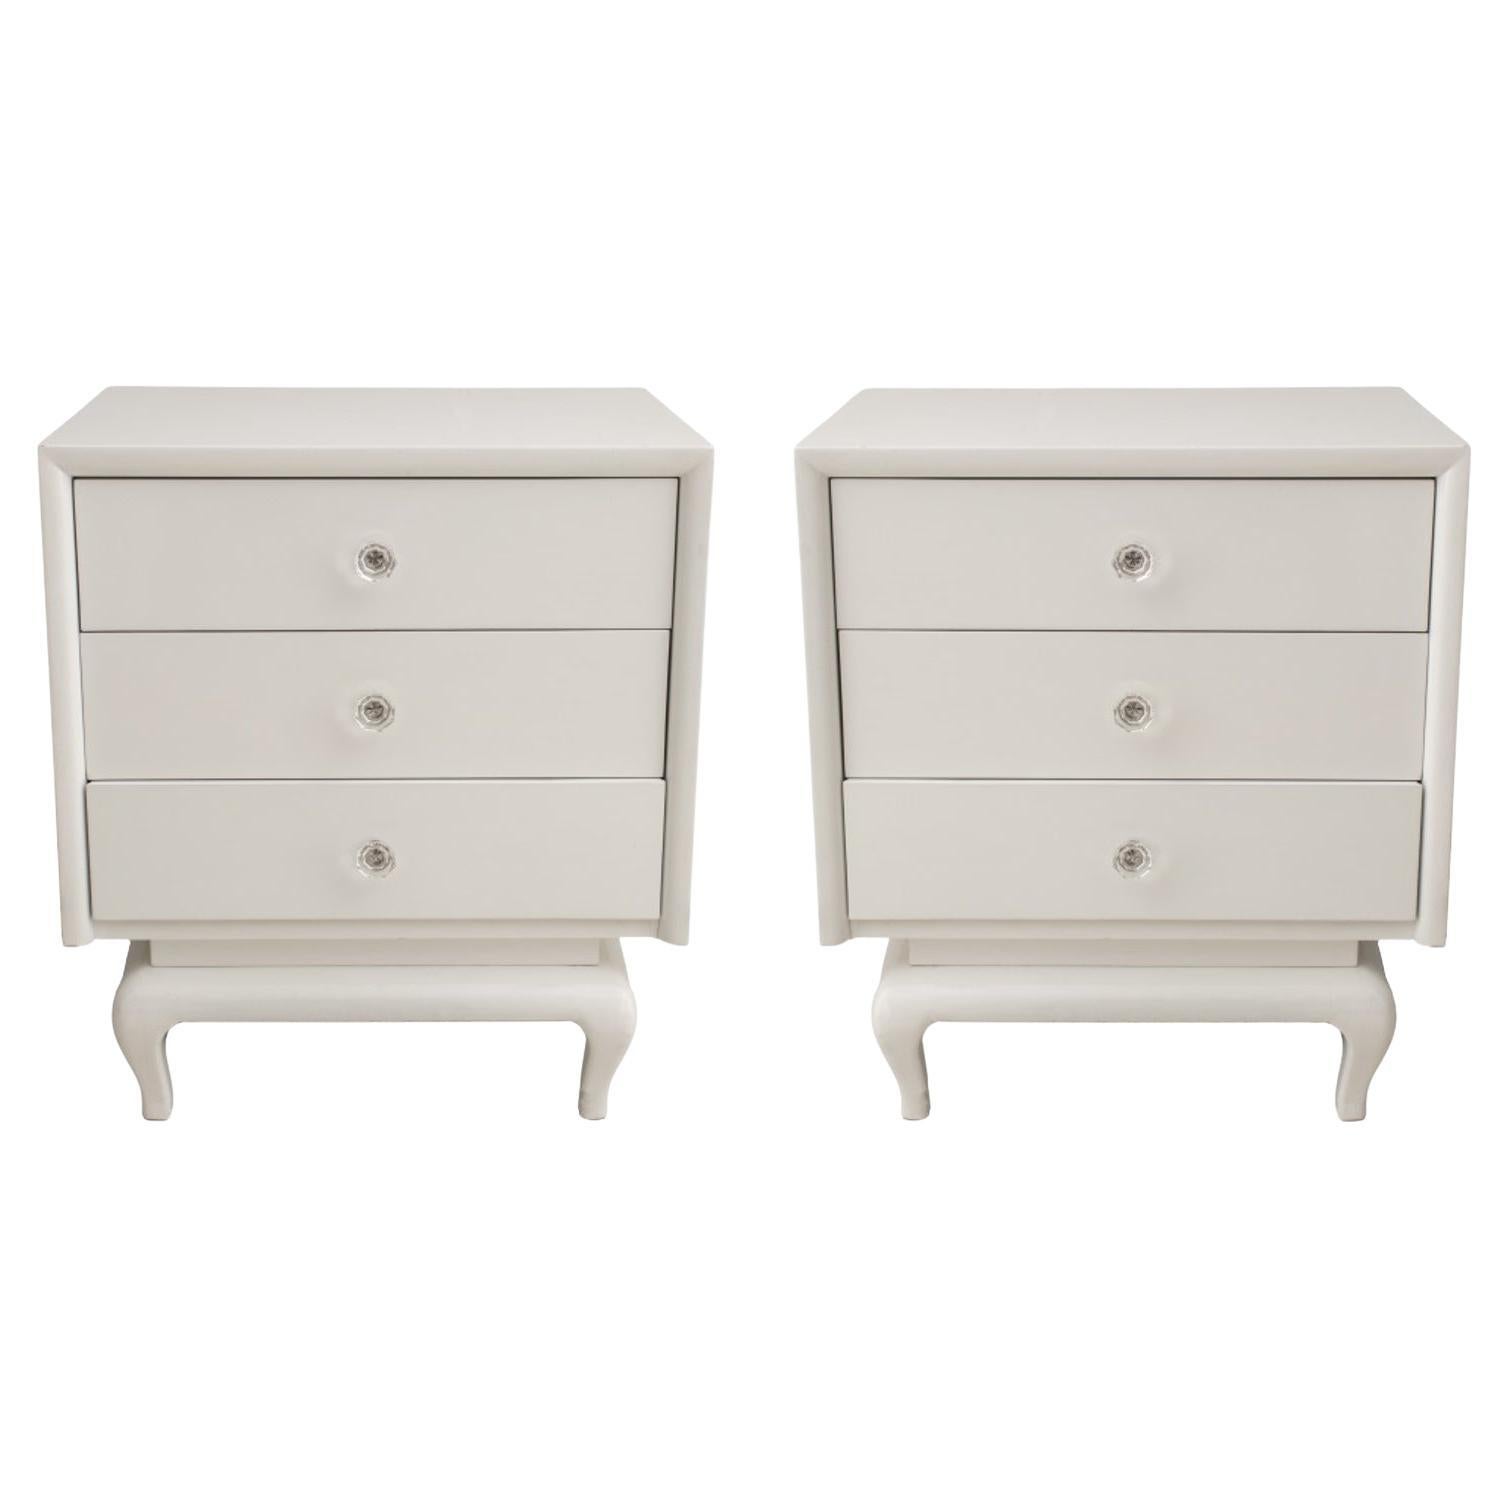 Modern White Lacquered Wood Nightstands, Pair